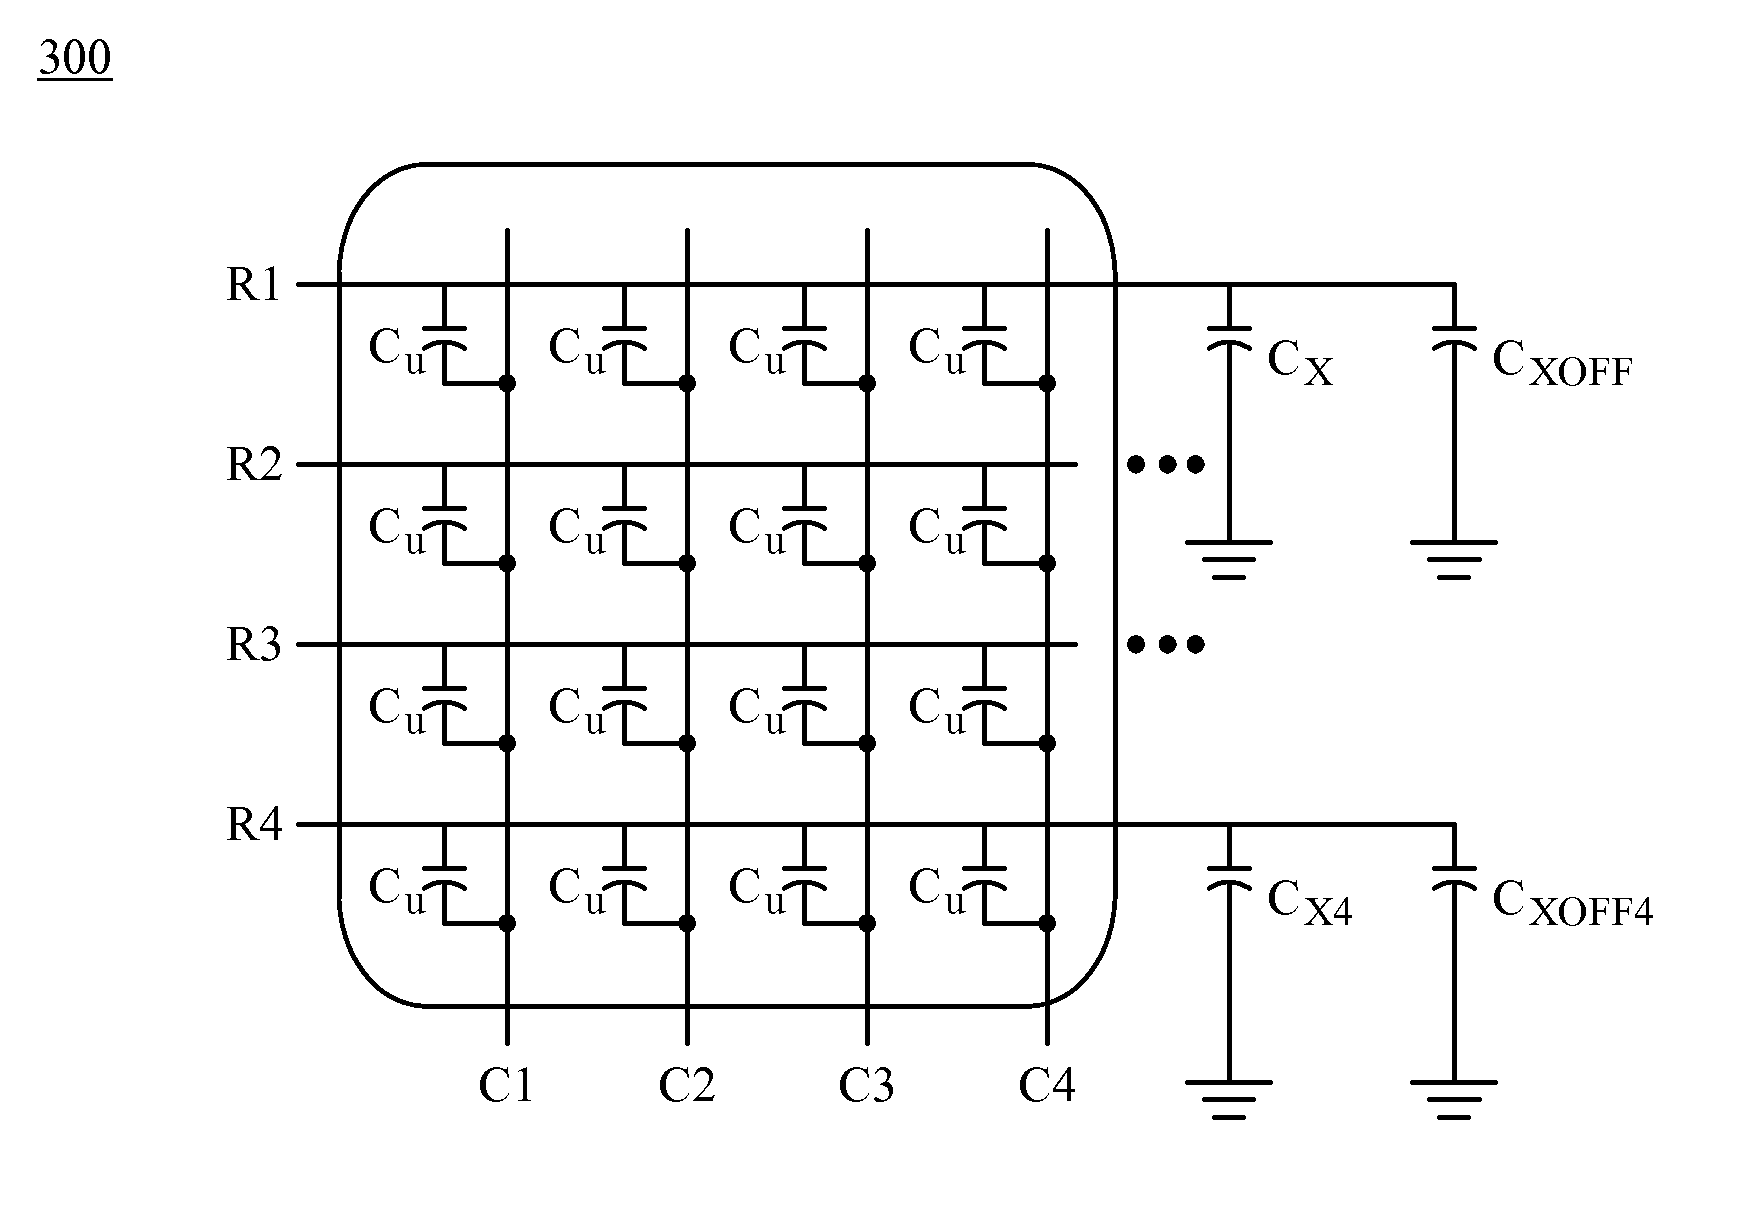 System for and method of transferring charge to convert capacitance to voltage for touchscreen controllers